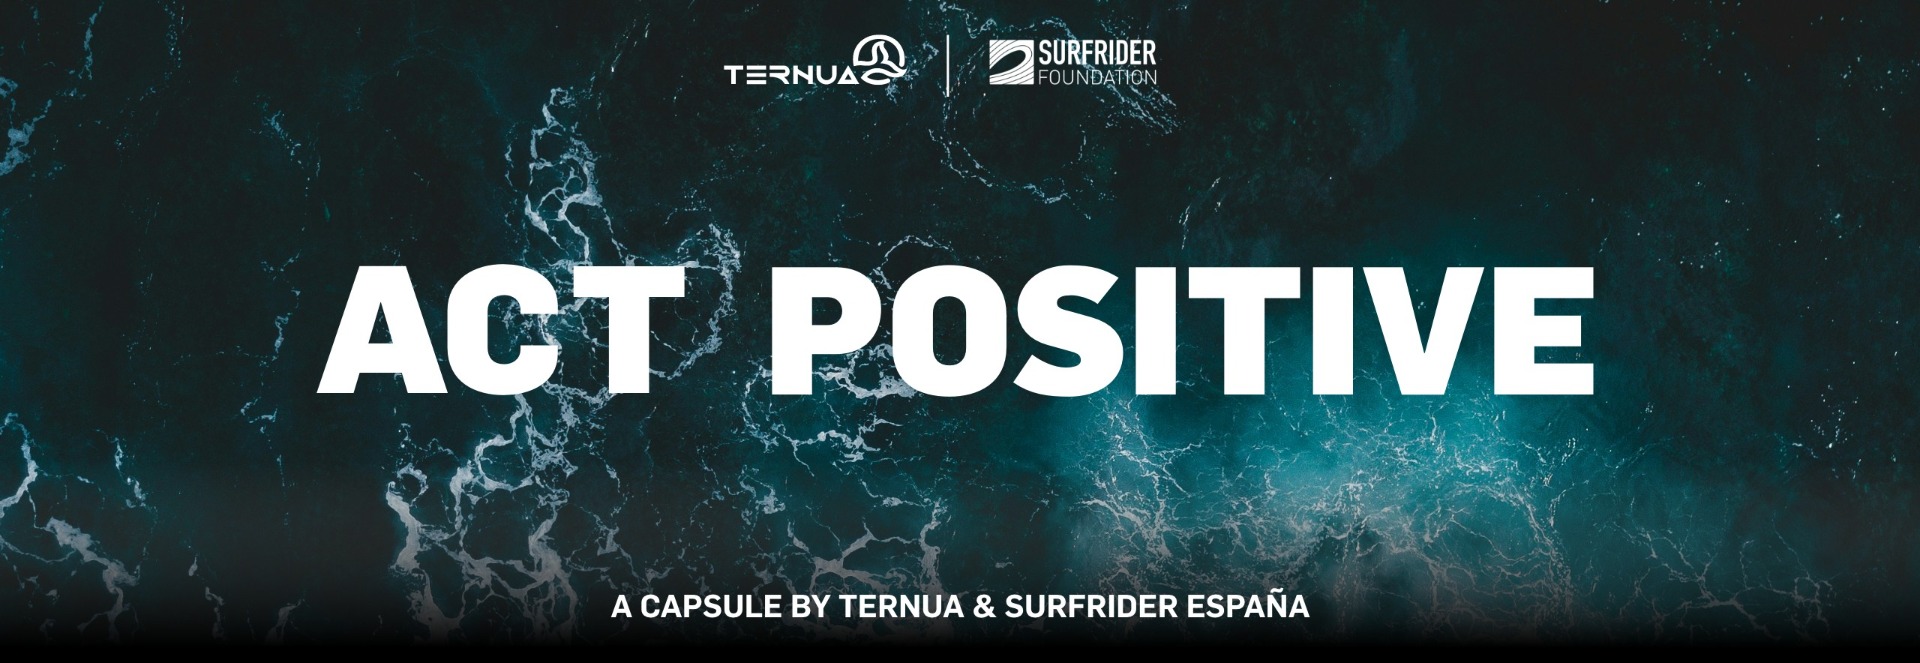 ACT POSITIVE CAPSULE by TERNUA & SURFRIDER